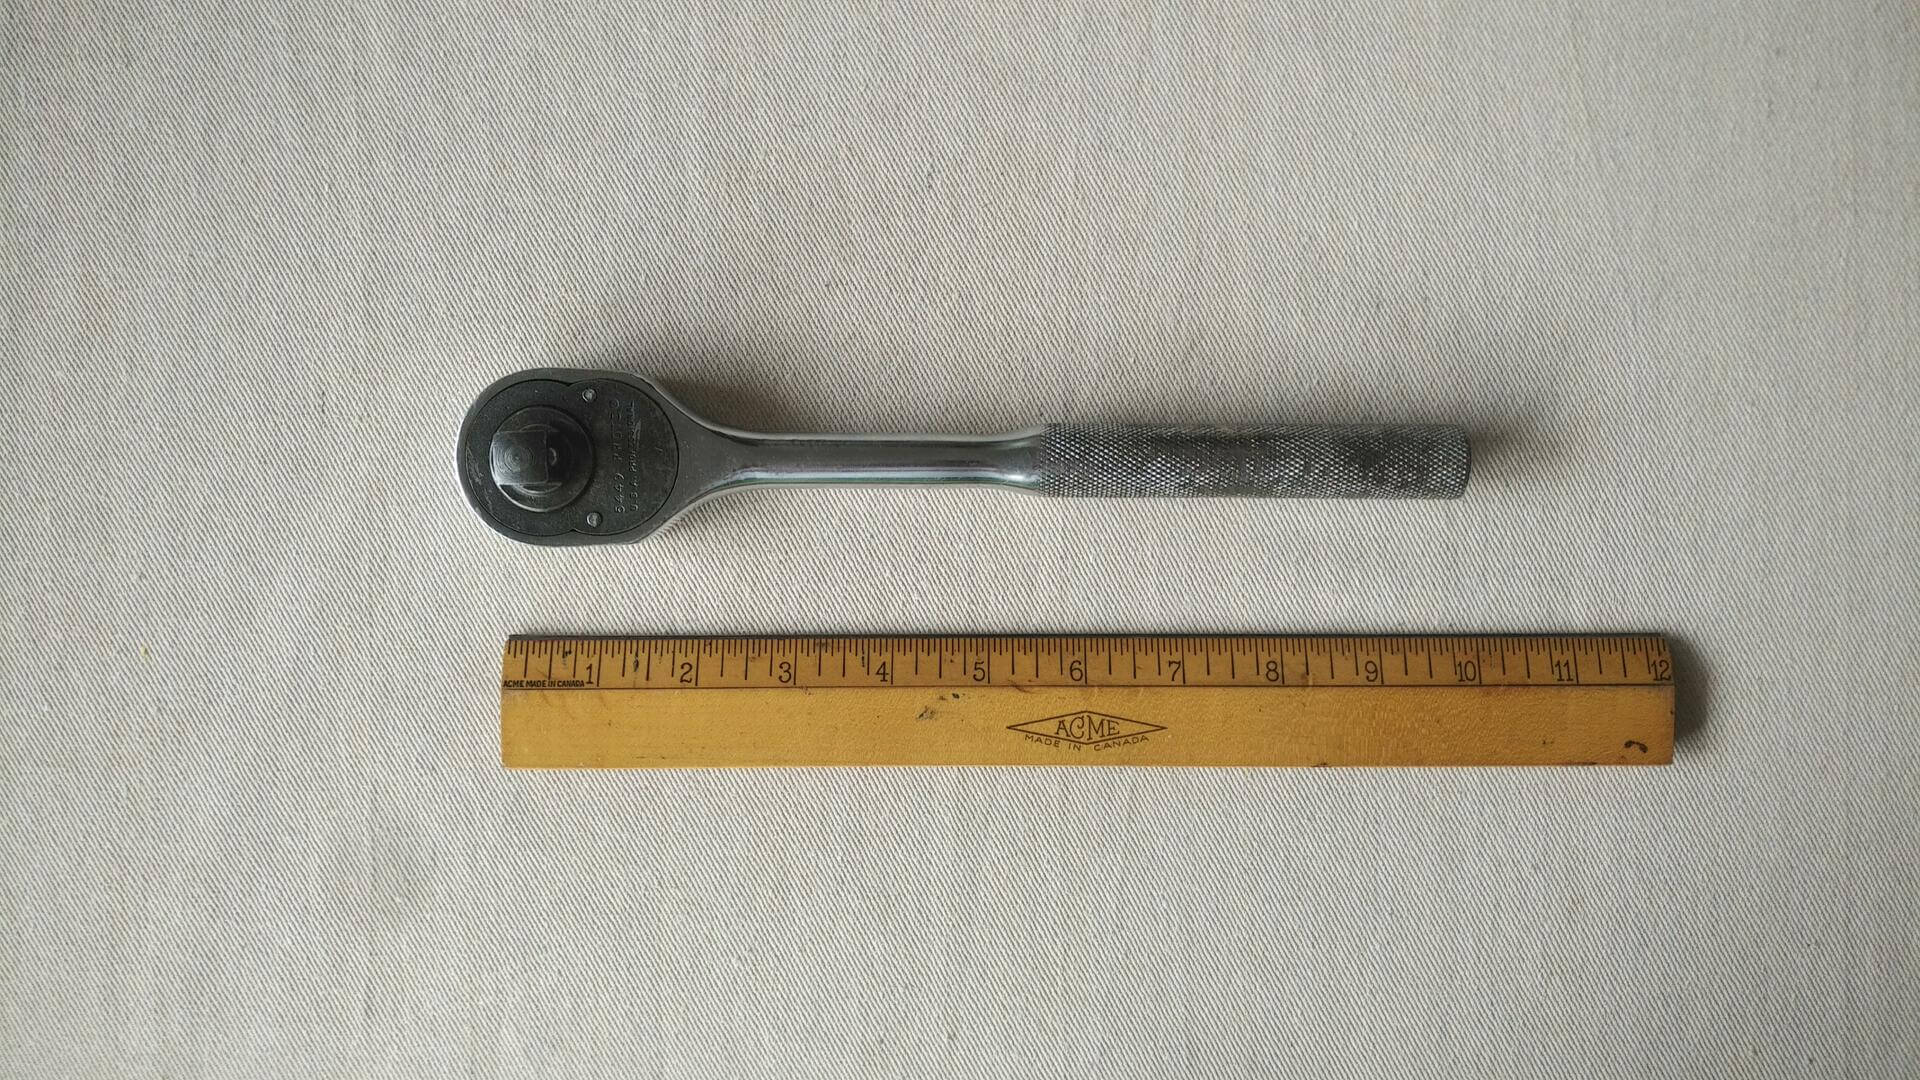 Nice antique Proto 5449 1/2" ratchet wrench w pear head and knurled handle 10.5" long. Vintage made in USA collectible automotive & mechanic hand tools.